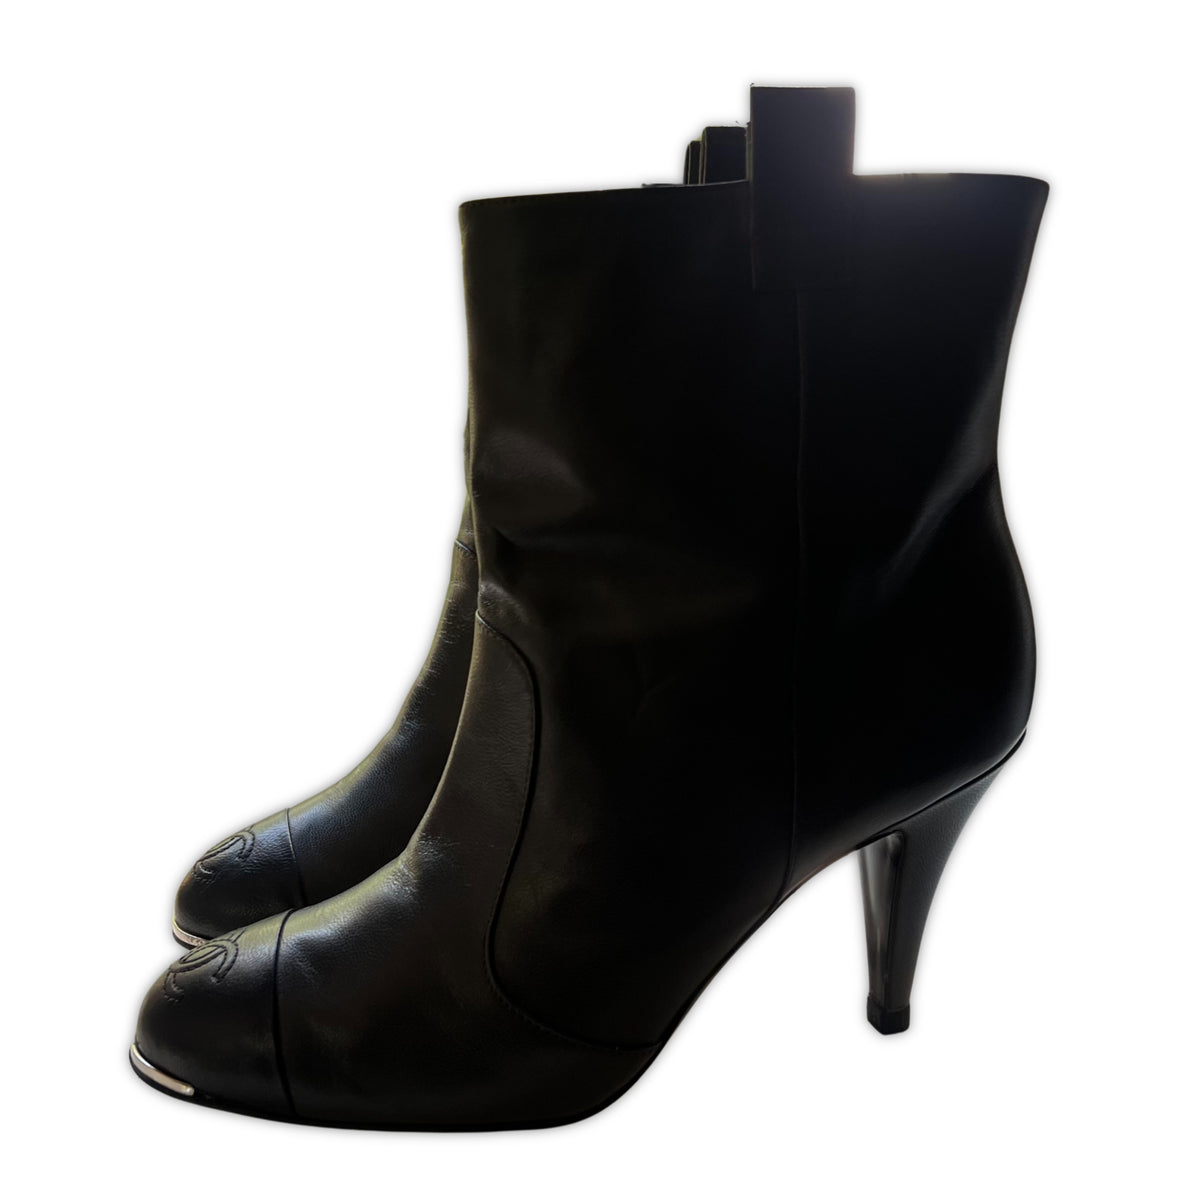 CHANEL Black Leather Boots | Size 38.5